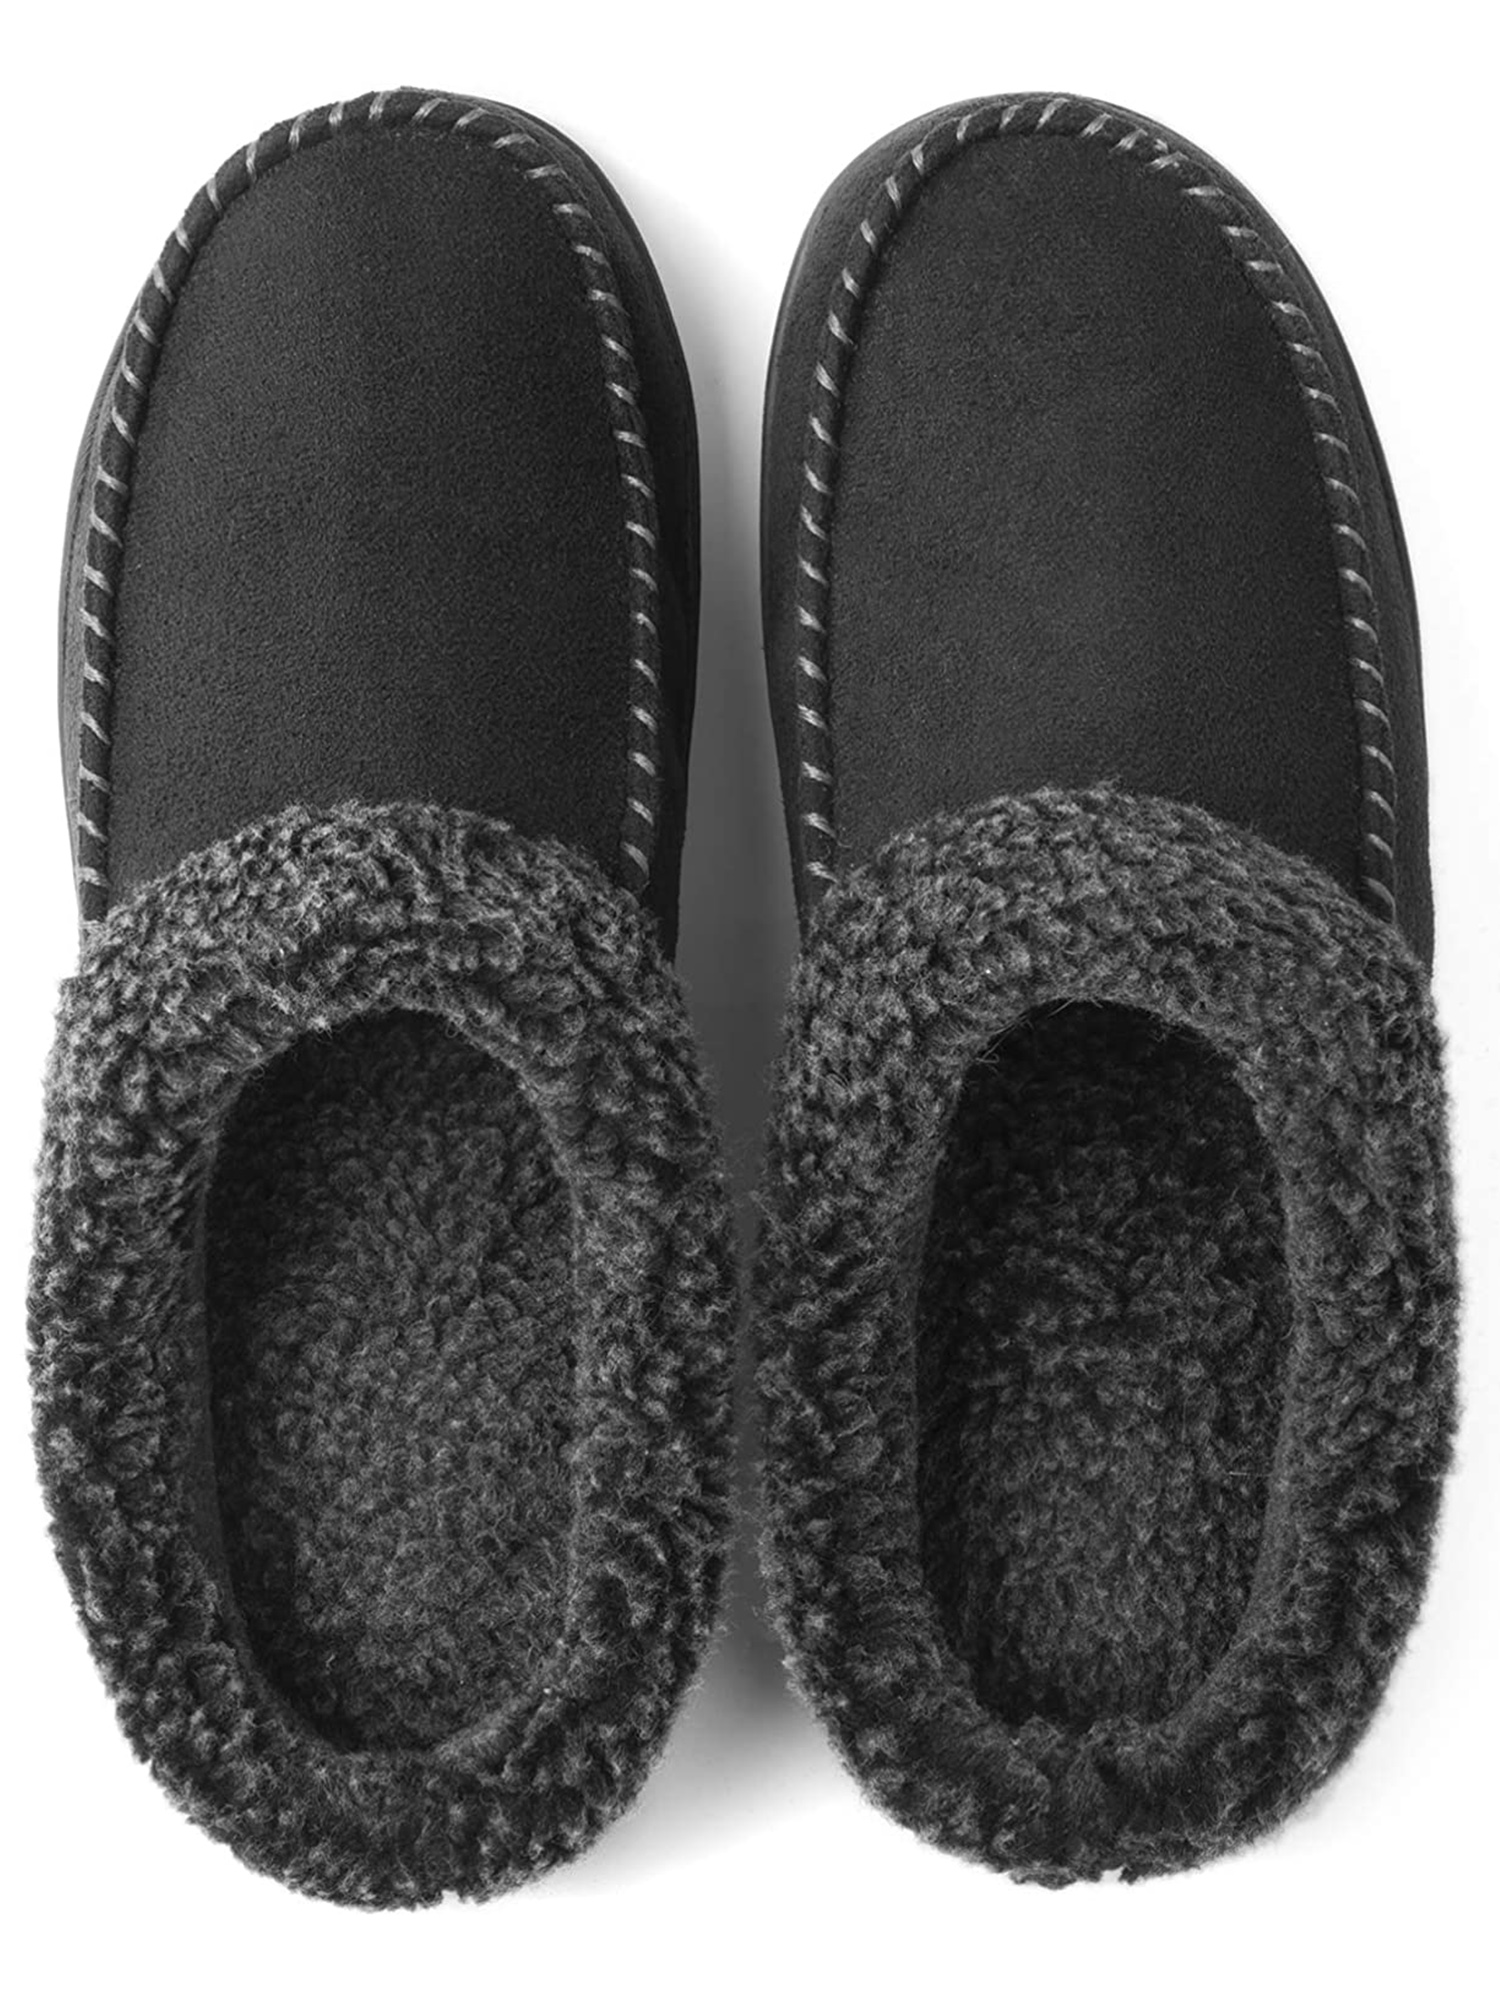 Men's Cozy Memory Foam Moccasin Suede Slippers with Fuzzy Plush Wool-Like Lining, Slip on Mules Clogs House Shoes with Indoor Outdoor Anti-Skid Rubber Sole - image 1 of 6